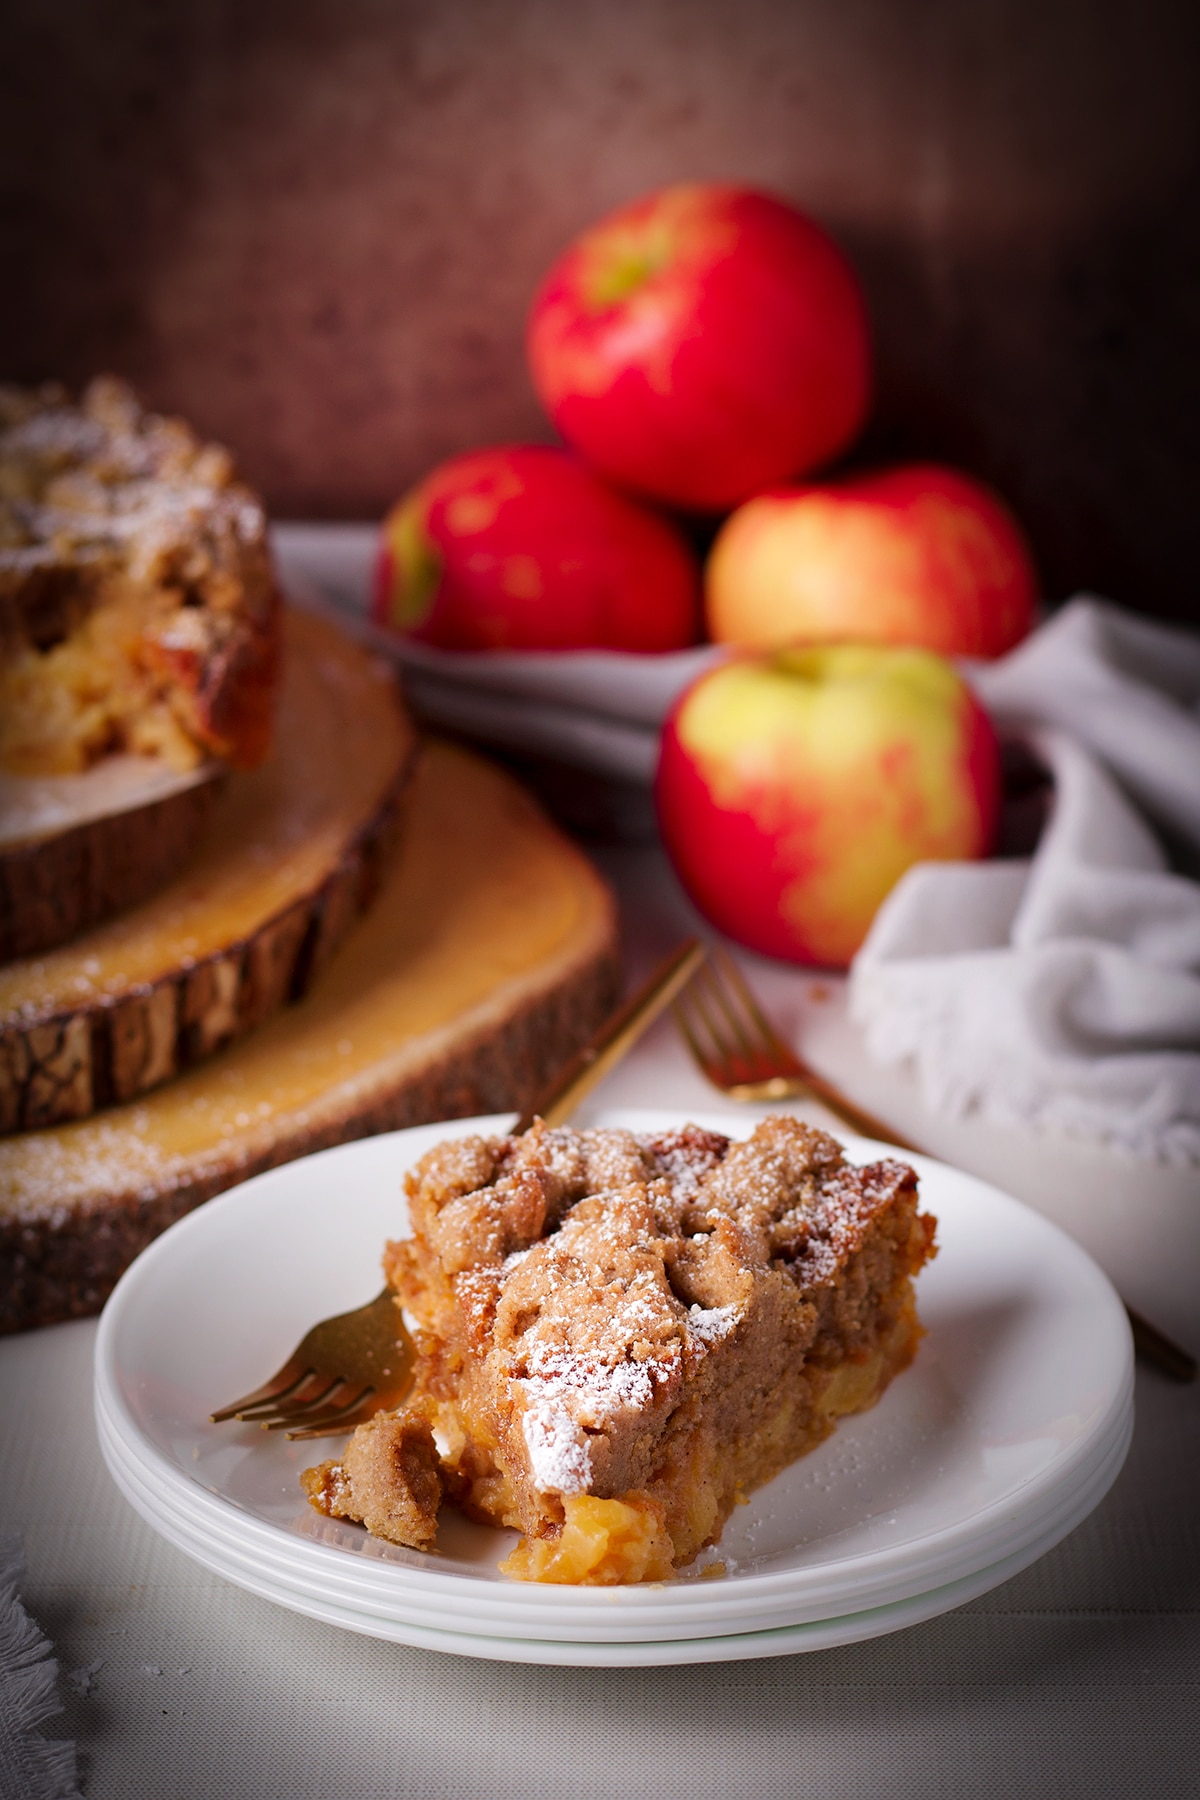 A slice of French Apple Crumb Cake with apples and the rest of the cake in the background.